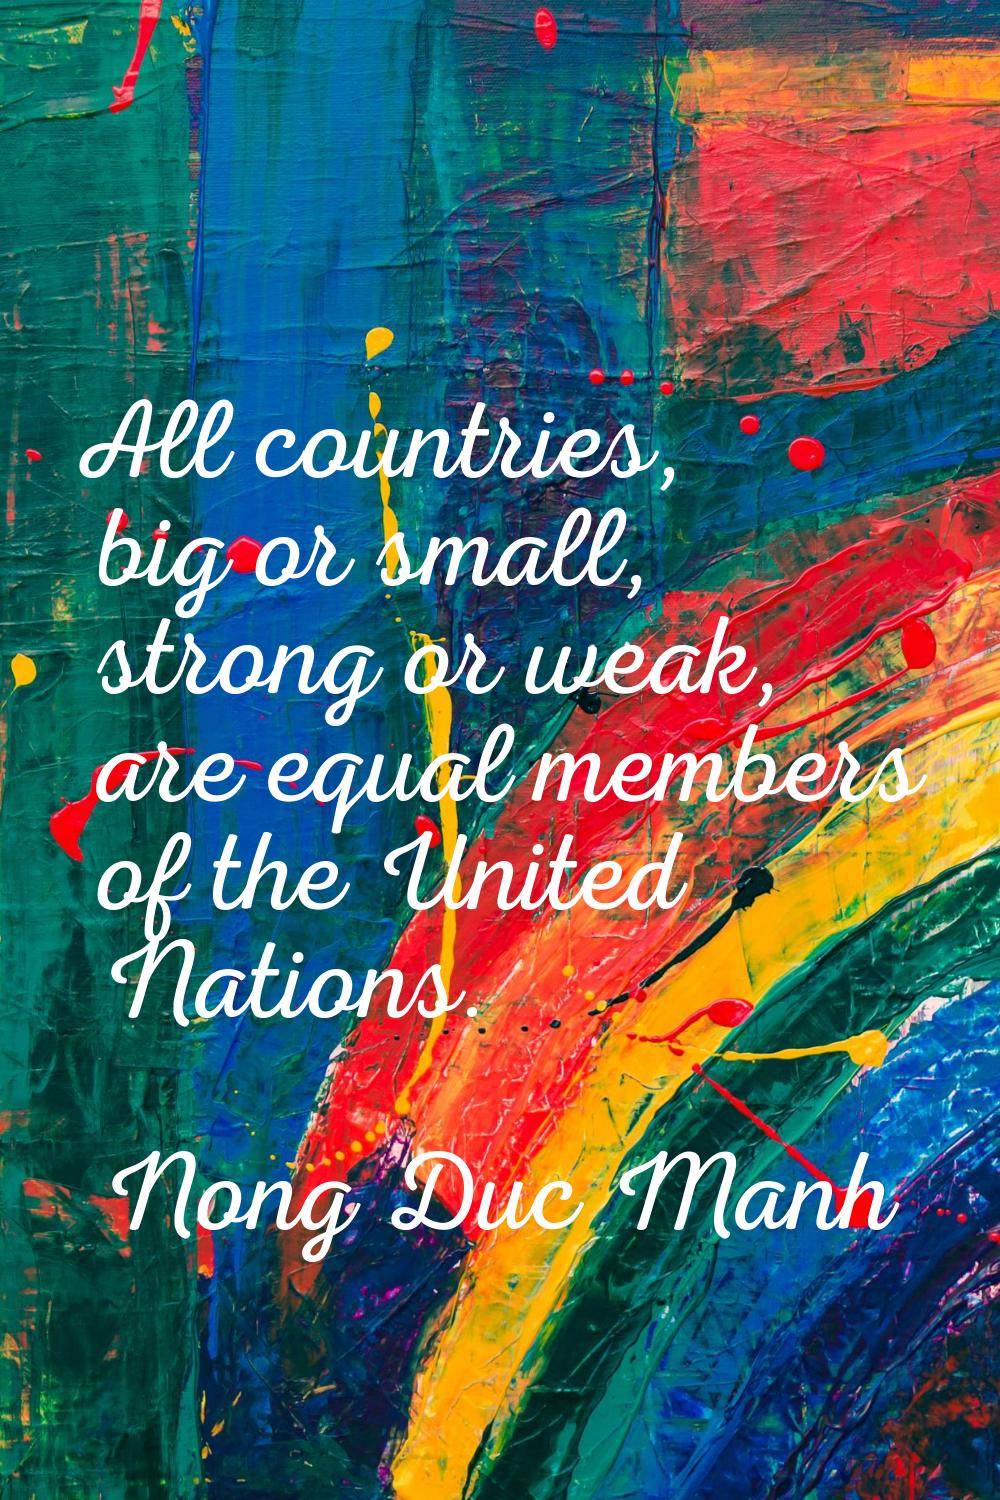 All countries, big or small, strong or weak, are equal members of the United Nations.